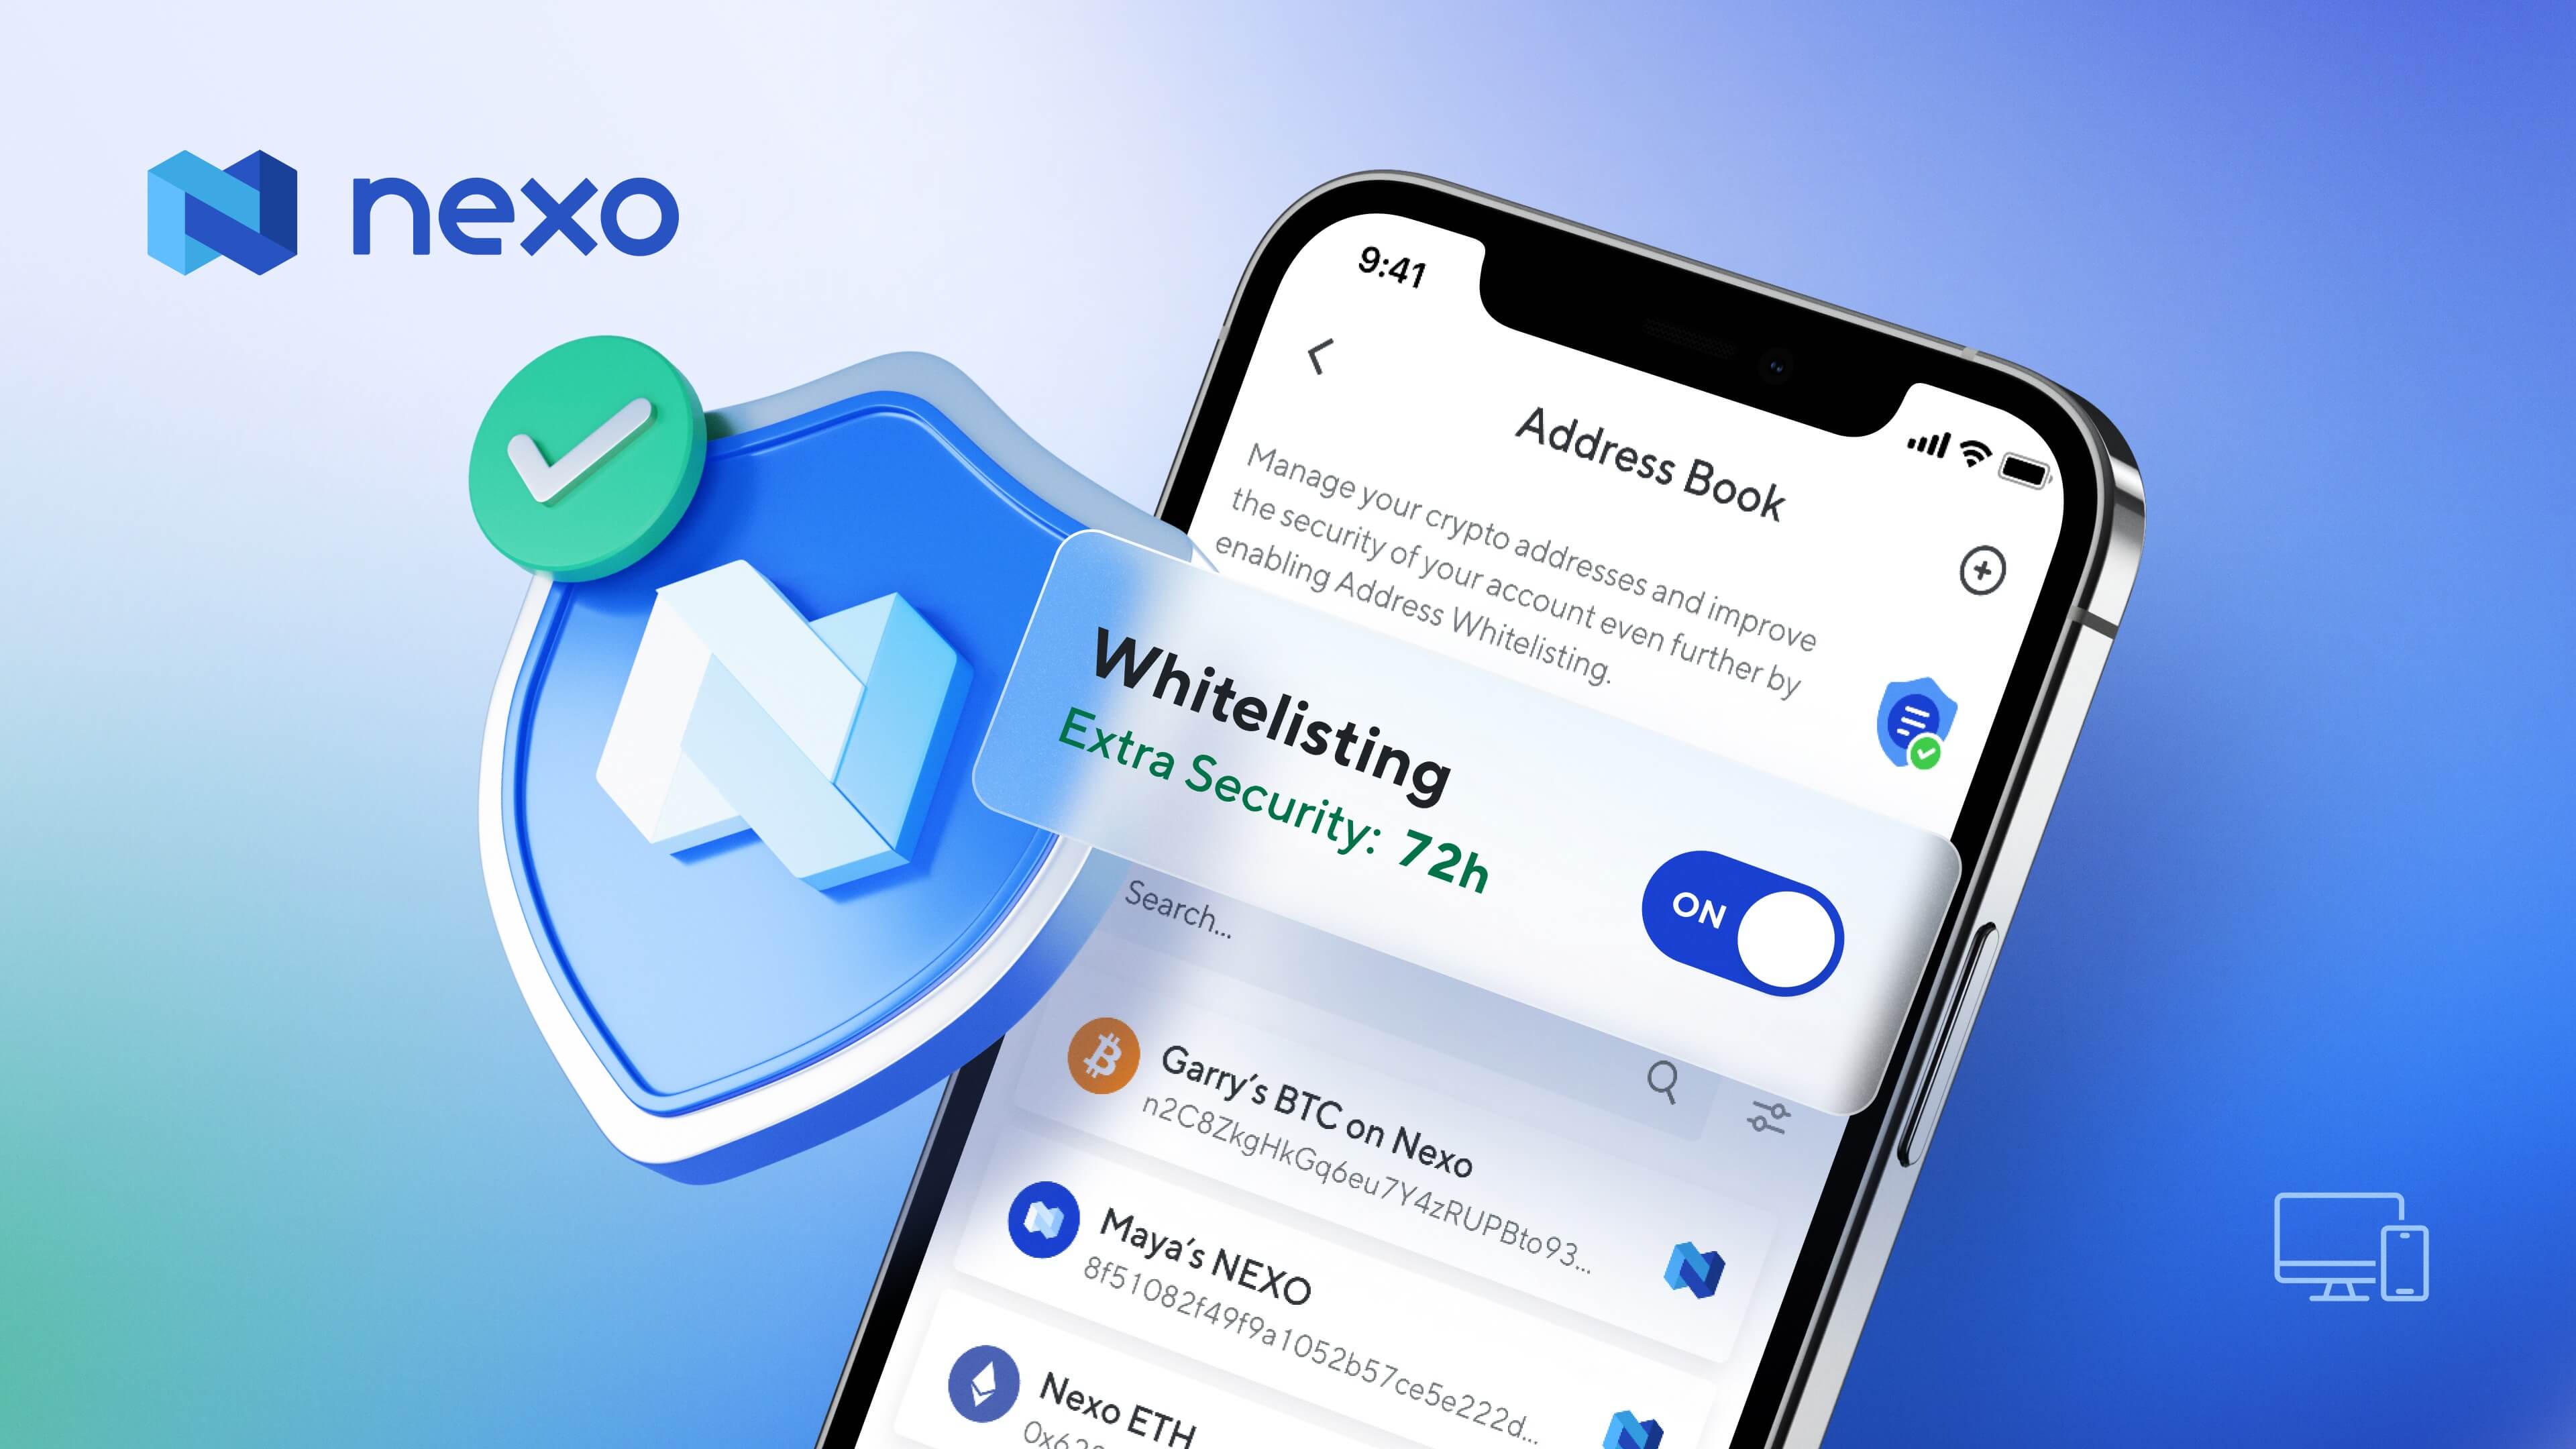 Maximize the Safety of Your Assets with Nexo’s Whitelisting